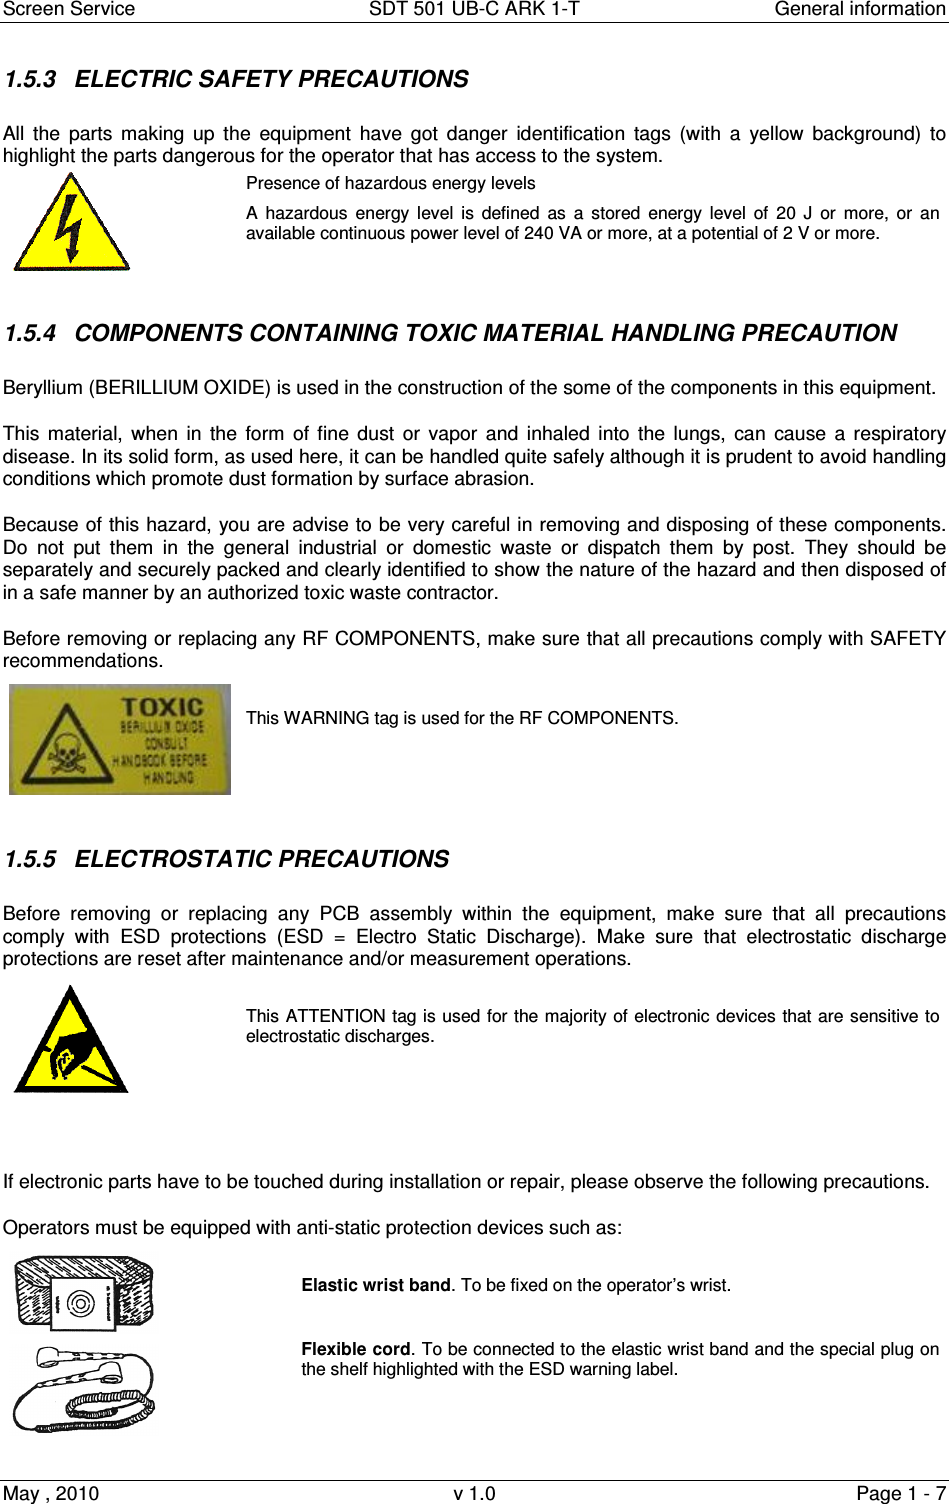 Screen Service  SDT 501 UB-C ARK 1-T  General information May , 2010  v 1.0  Page 1 - 7 1.5.3  ELECTRIC SAFETY PRECAUTIONS All  the  parts  making  up  the  equipment  have  got  danger  identification  tags  (with  a  yellow  background)  to highlight the parts dangerous for the operator that has access to the system.  Presence of hazardous energy levels A  hazardous  energy  level  is  defined  as  a  stored  energy  level  of  20  J  or  more,  or  an available continuous power level of 240 VA or more, at a potential of 2 V or more.  1.5.4  COMPONENTS CONTAINING TOXIC MATERIAL HANDLING PRECAUTION  Beryllium (BERILLIUM OXIDE) is used in the construction of the some of the components in this equipment. This material,  when  in  the  form  of fine dust or  vapor  and inhaled  into the lungs,  can  cause  a respiratory disease. In its solid form, as used here, it can be handled quite safely although it is prudent to avoid handling conditions which promote dust formation by surface abrasion. Because of this hazard, you are advise to be very careful in removing and disposing of these components. Do  not  put  them  in  the  general  industrial  or  domestic  waste  or  dispatch  them  by  post.  They  should  be separately and securely packed and clearly identified to show the nature of the hazard and then disposed of in a safe manner by an authorized toxic waste contractor. Before removing or replacing any RF COMPONENTS, make sure that all precautions comply with SAFETY recommendations.    This WARNING tag is used for the RF COMPONENTS.  1.5.5  ELECTROSTATIC PRECAUTIONS Before  removing  or  replacing  any  PCB  assembly  within  the  equipment,  make  sure  that  all  precautions comply  with  ESD  protections  (ESD  =  Electro  Static  Discharge).  Make  sure  that  electrostatic  discharge protections are reset after maintenance and/or measurement operations.   This ATTENTION tag is used for the majority of electronic devices that are sensitive to electrostatic discharges.   If electronic parts have to be touched during installation or repair, please observe the following precautions. Operators must be equipped with anti-static protection devices such as:   Elastic wrist band. To be fixed on the operator’s wrist.  Flexible cord. To be connected to the elastic wrist band and the special plug on the shelf highlighted with the ESD warning label.  